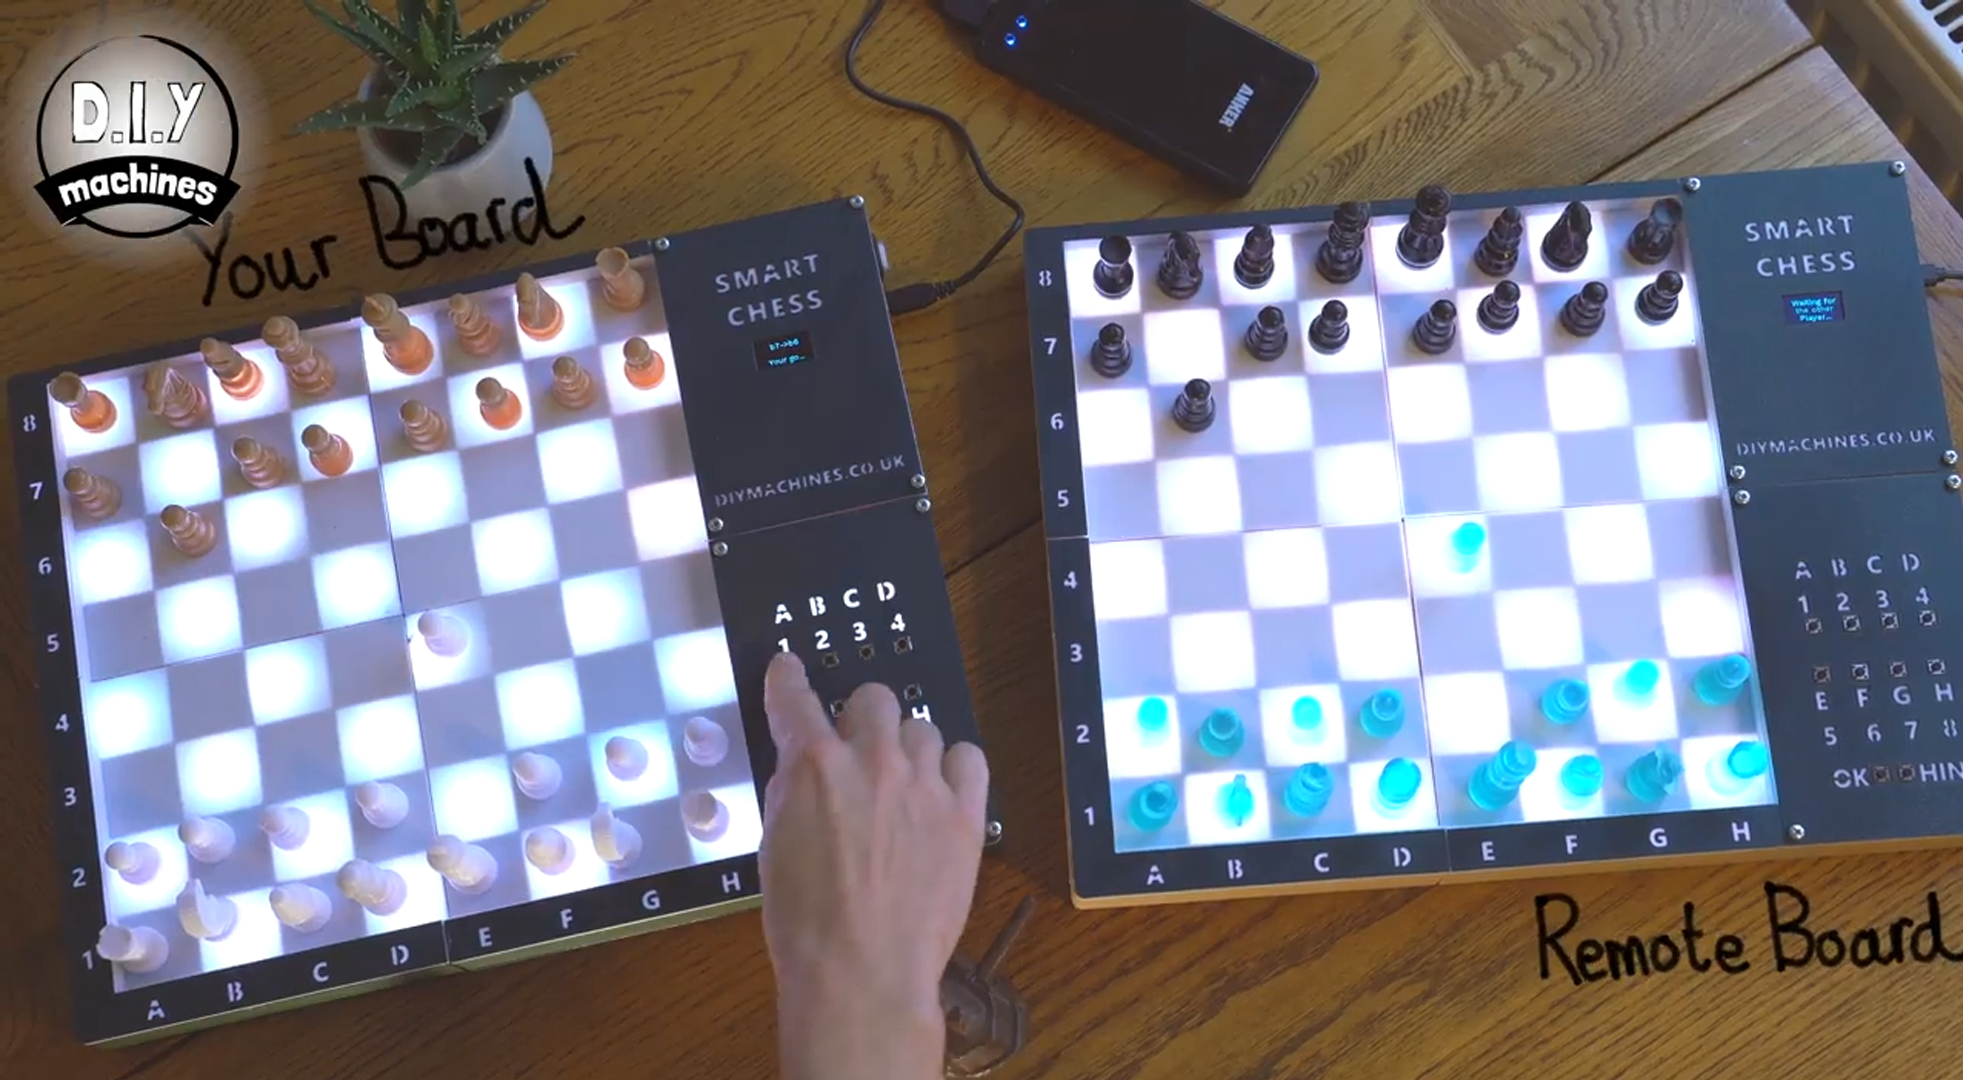 Arduino moves chess pieces using AI